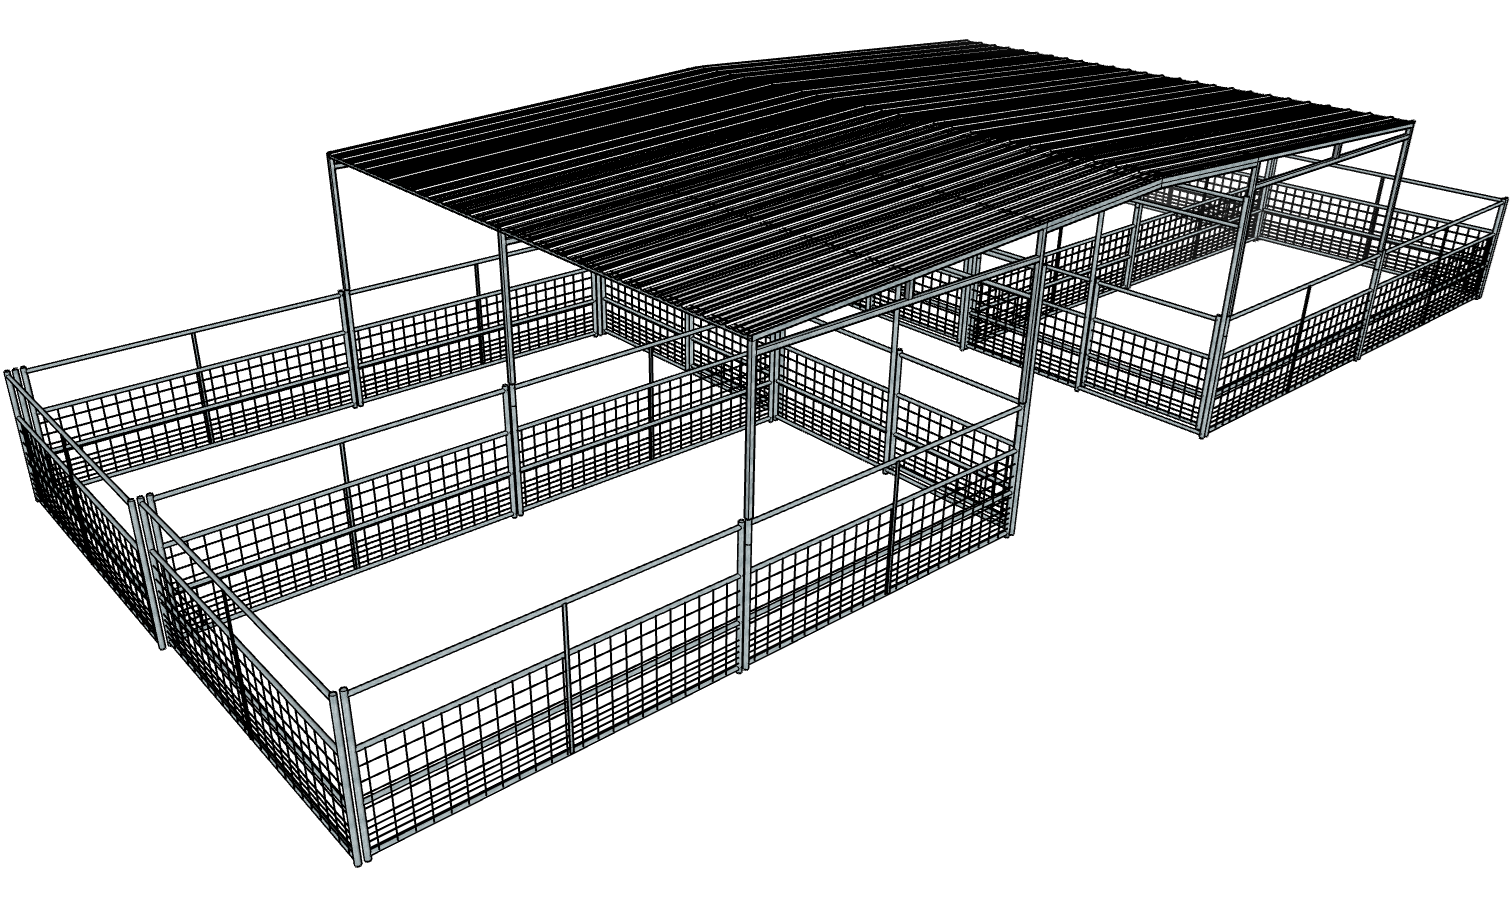 Galvanized 50 Ft X 20 Ft 4-Rail with Mesh 4 Stall Barn Kit with 30 Ft Gable Roof